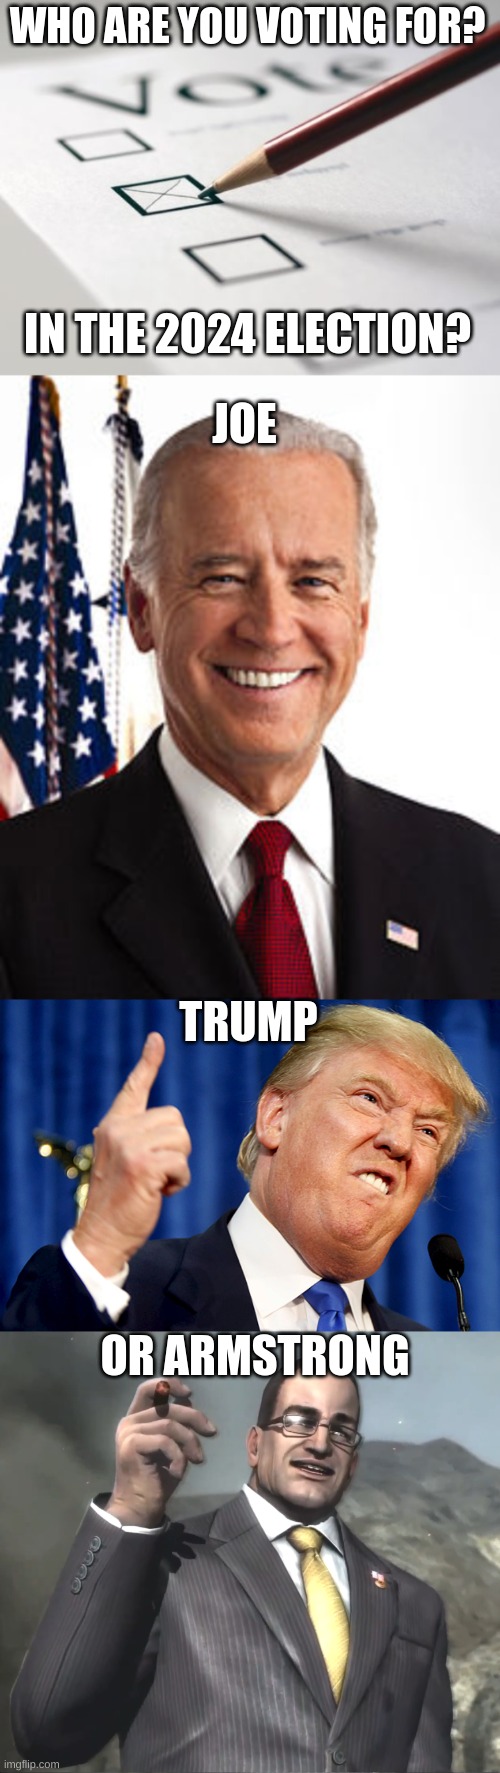 (UN)official candidates for election 2024 | WHO ARE YOU VOTING FOR? JOE; IN THE 2024 ELECTION? TRUMP; OR ARMSTRONG | image tagged in voting ballot,memes,joe biden,donald trump,senator armstrong,voting | made w/ Imgflip meme maker